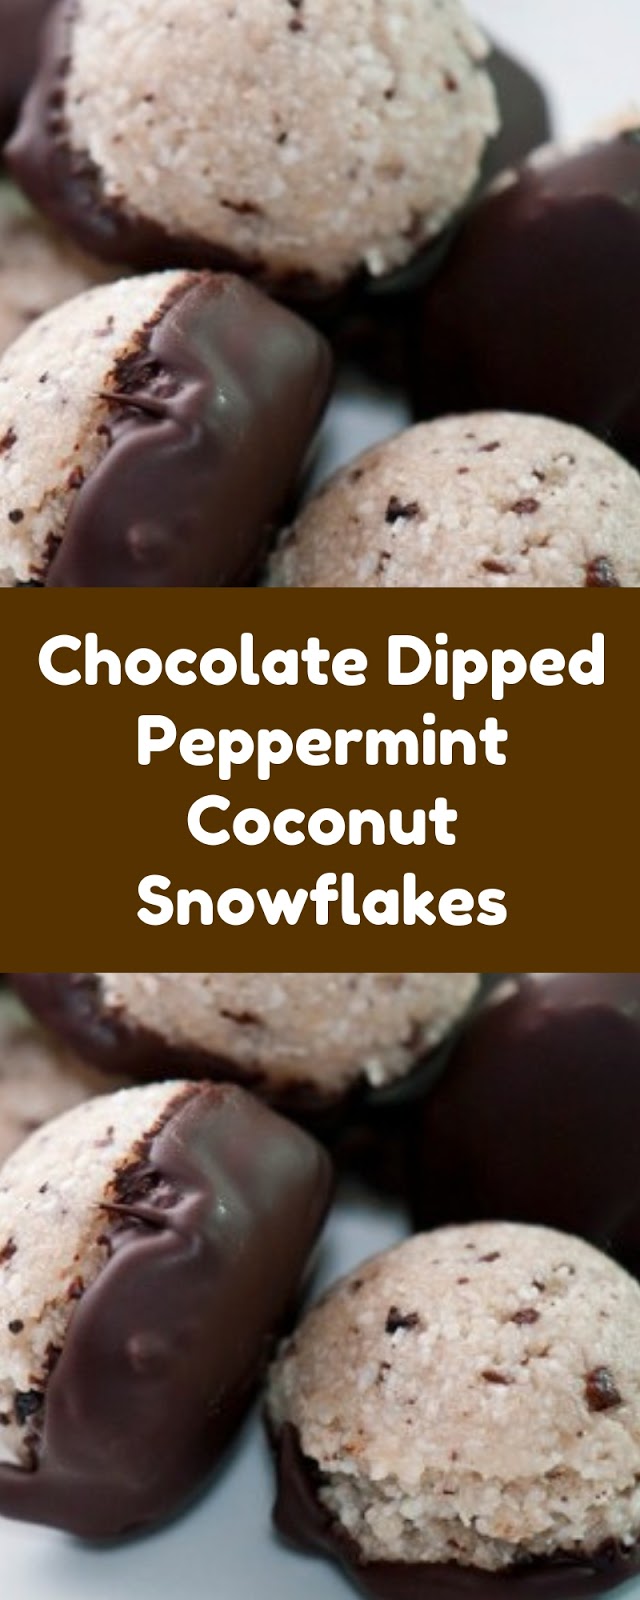 Chocolate Dipped Peppermint Coconut Snowflakes